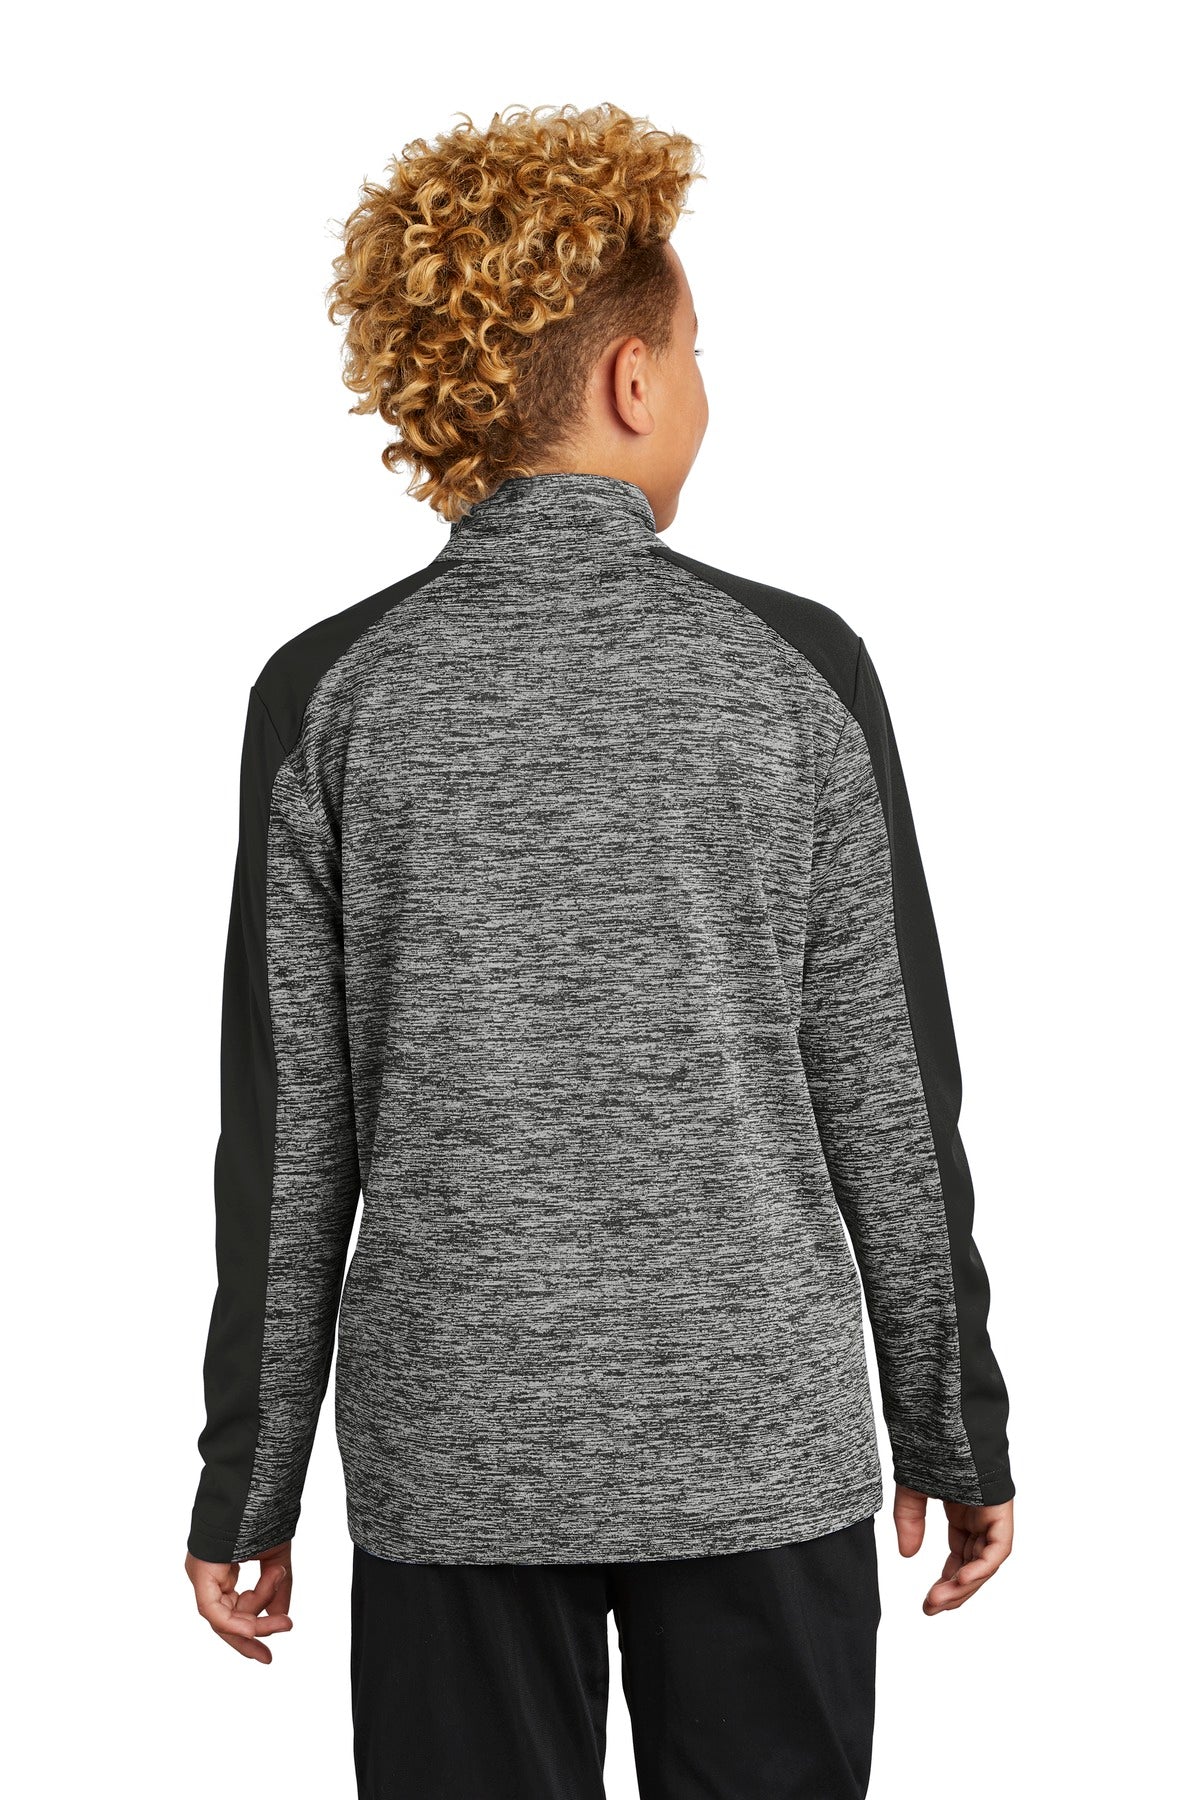 Sport-Tek ® Youth PosiCharge ® Electric Heather Colorblock 1/4-Zip Pullover. YST397 - DFW Impression